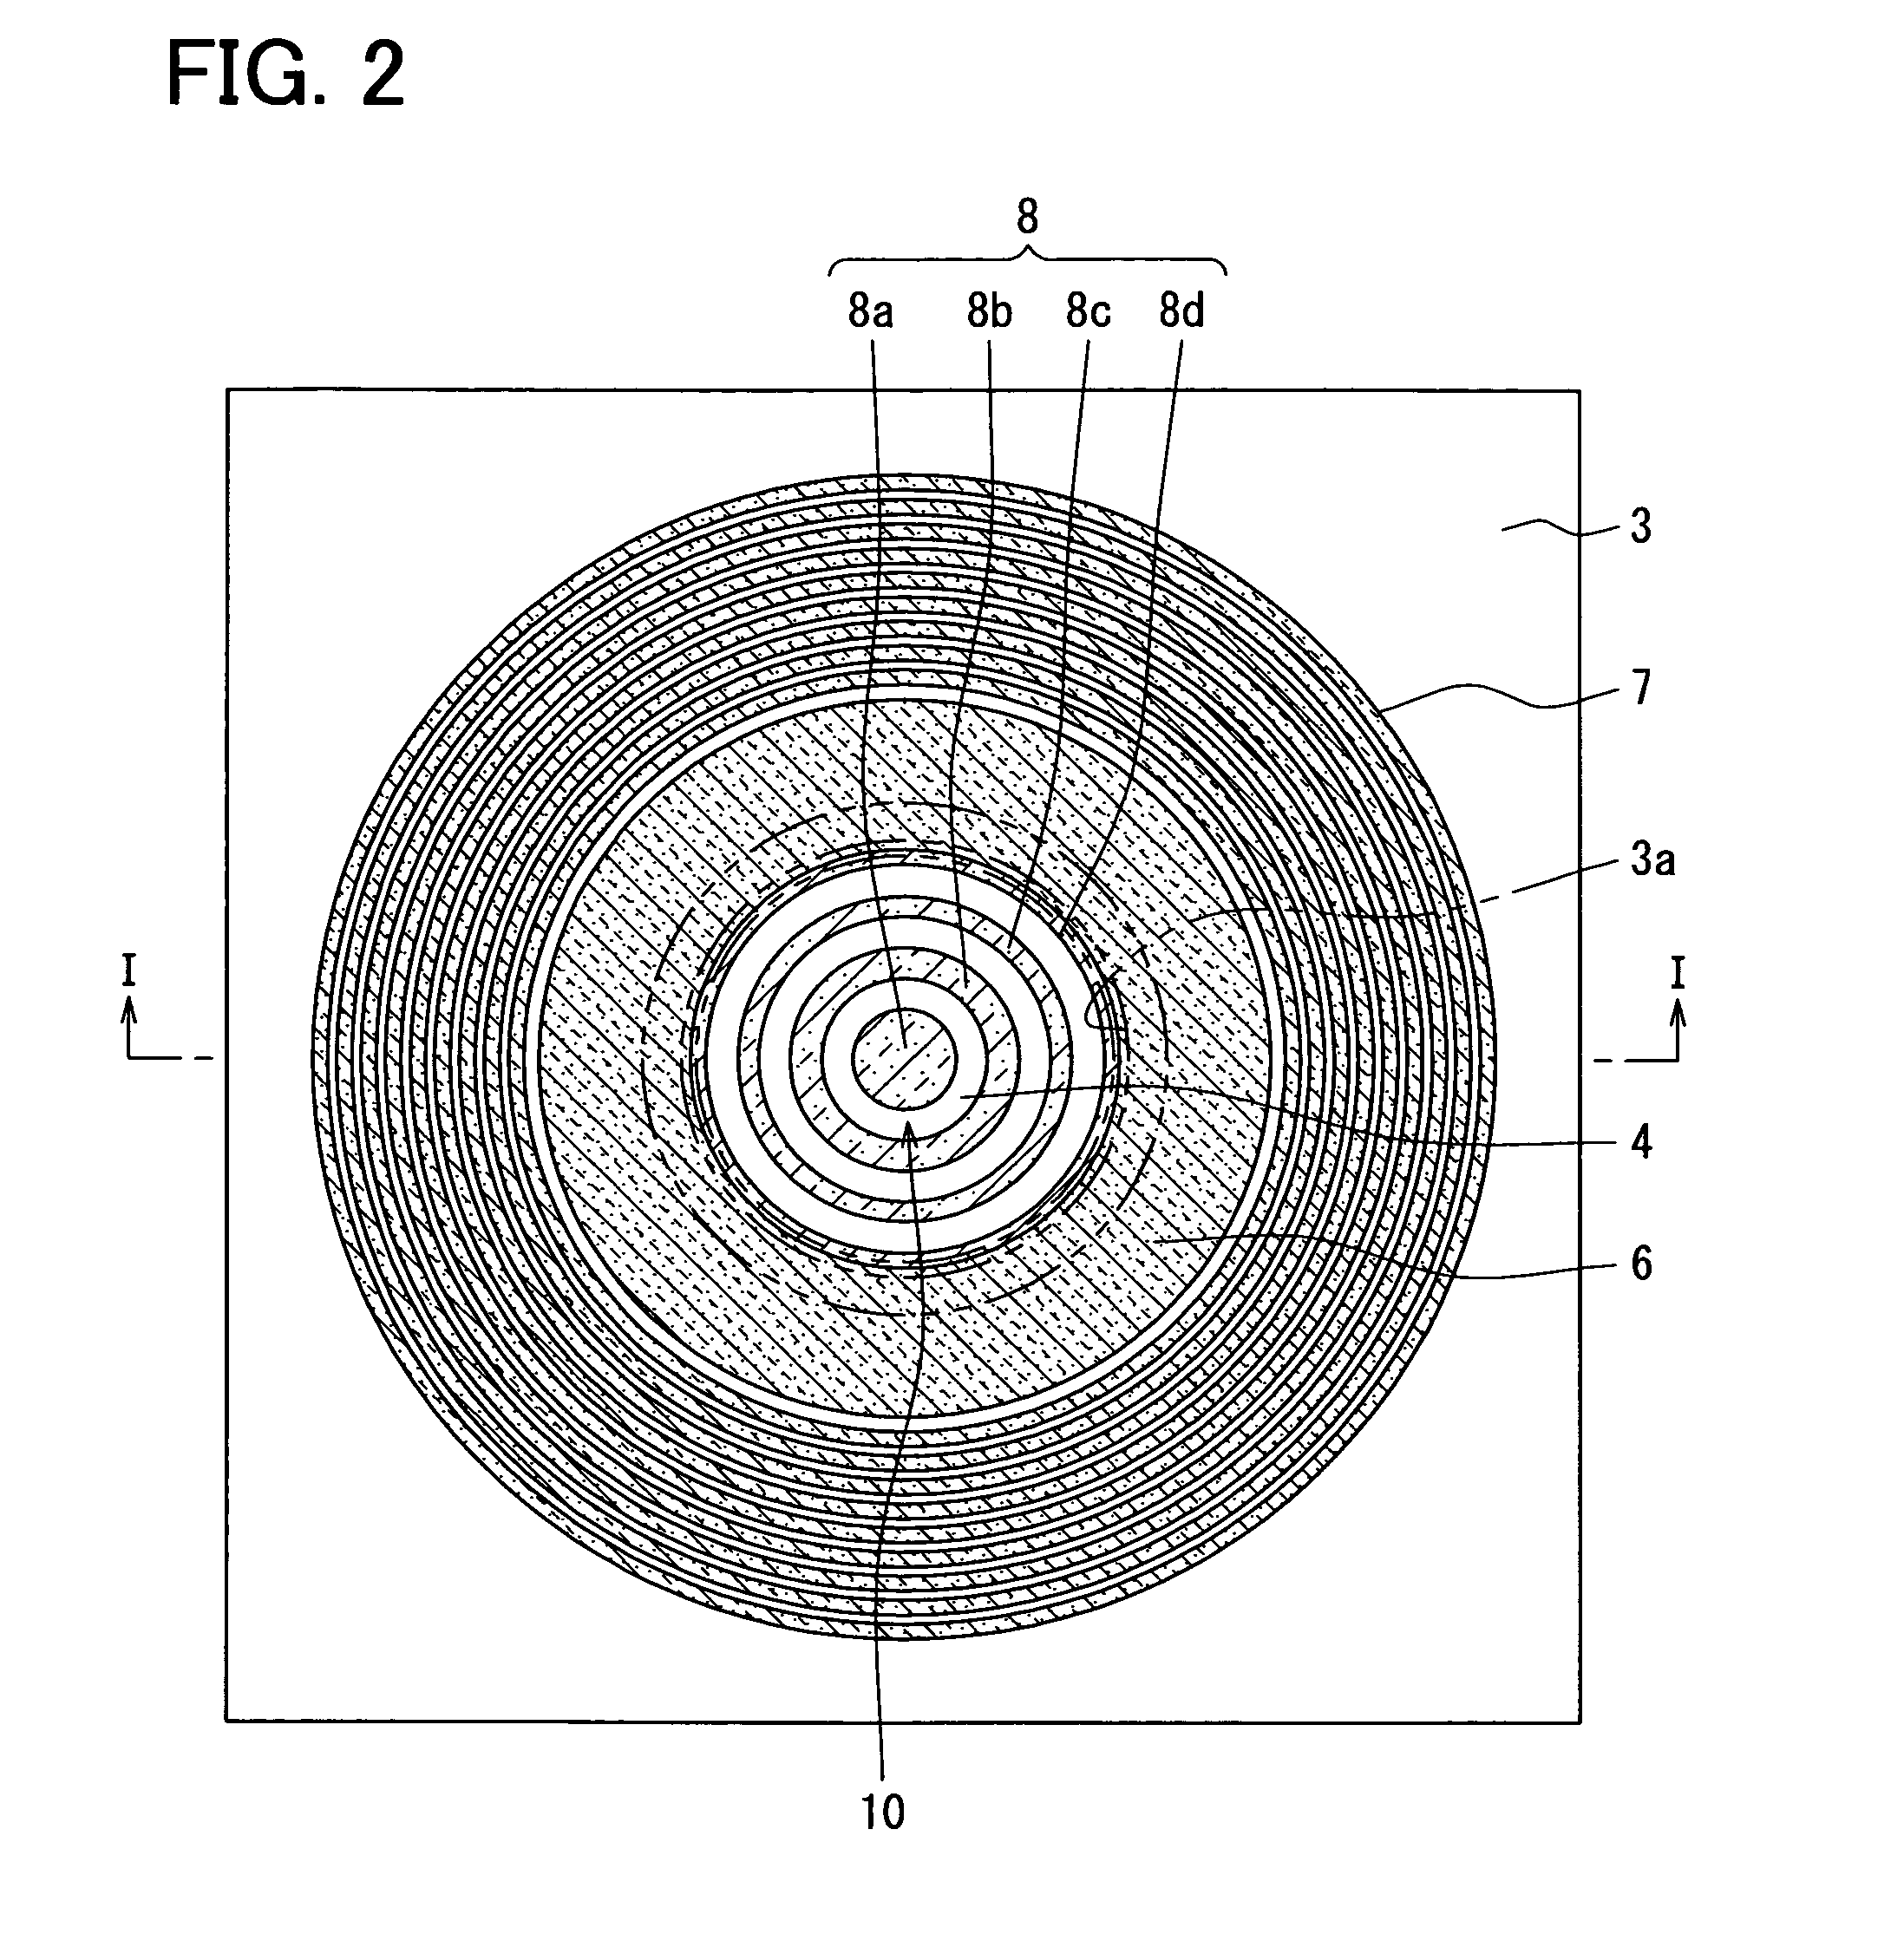 Silicon carbide semiconductor device having junction barrier Schottky diode